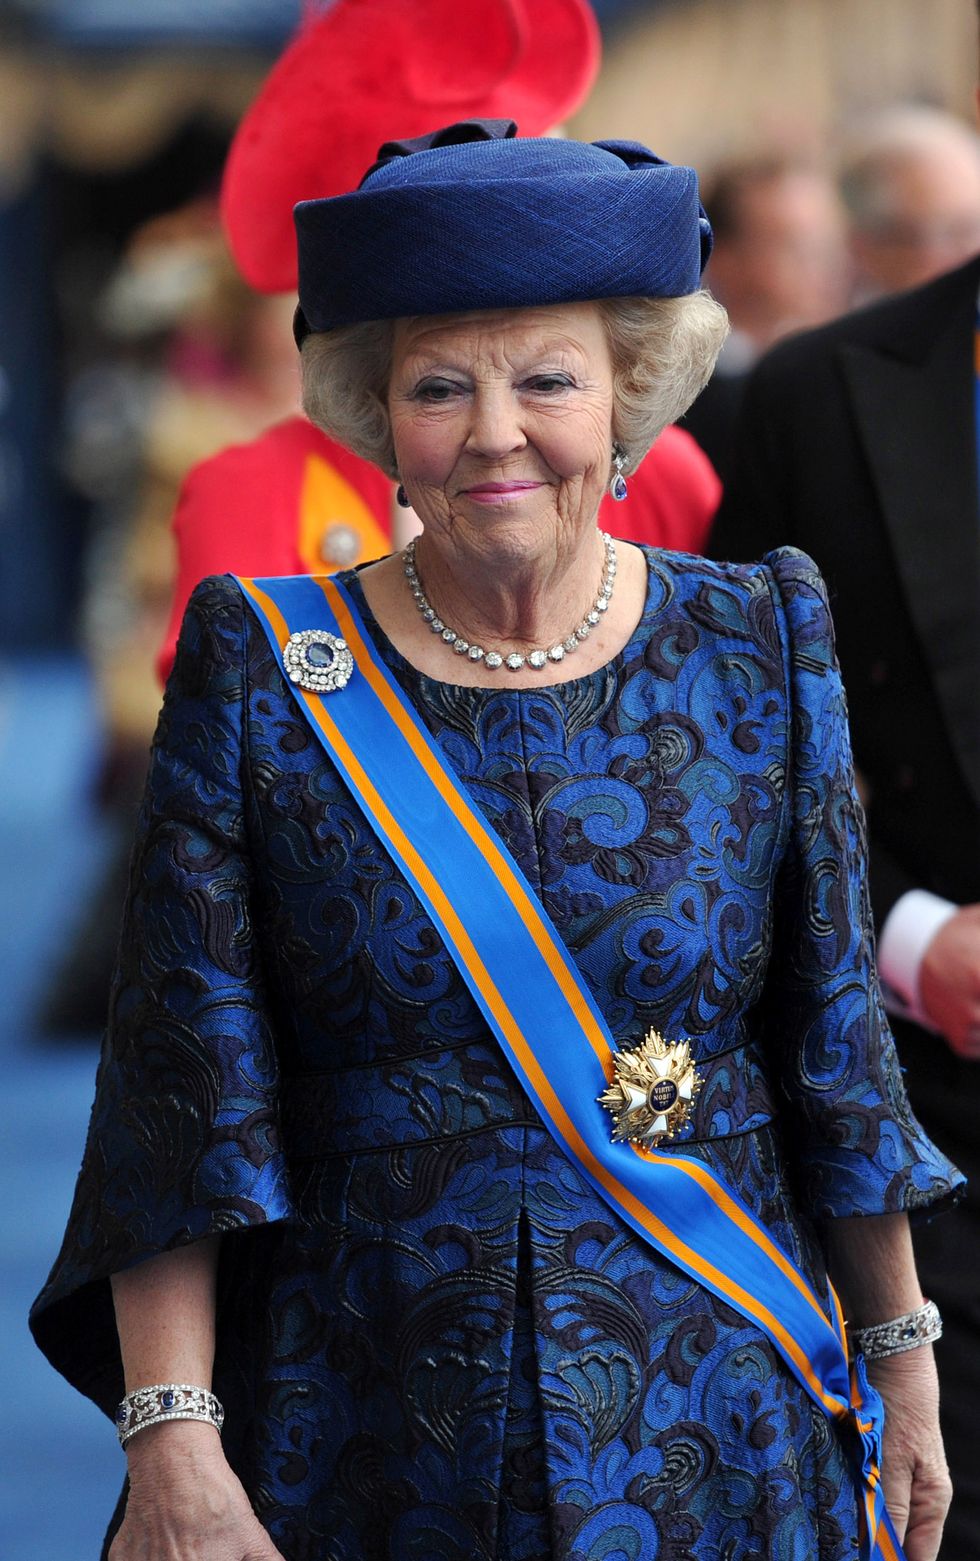 inauguration of king willem alexander as queen beatrix of the netherlands abdicates